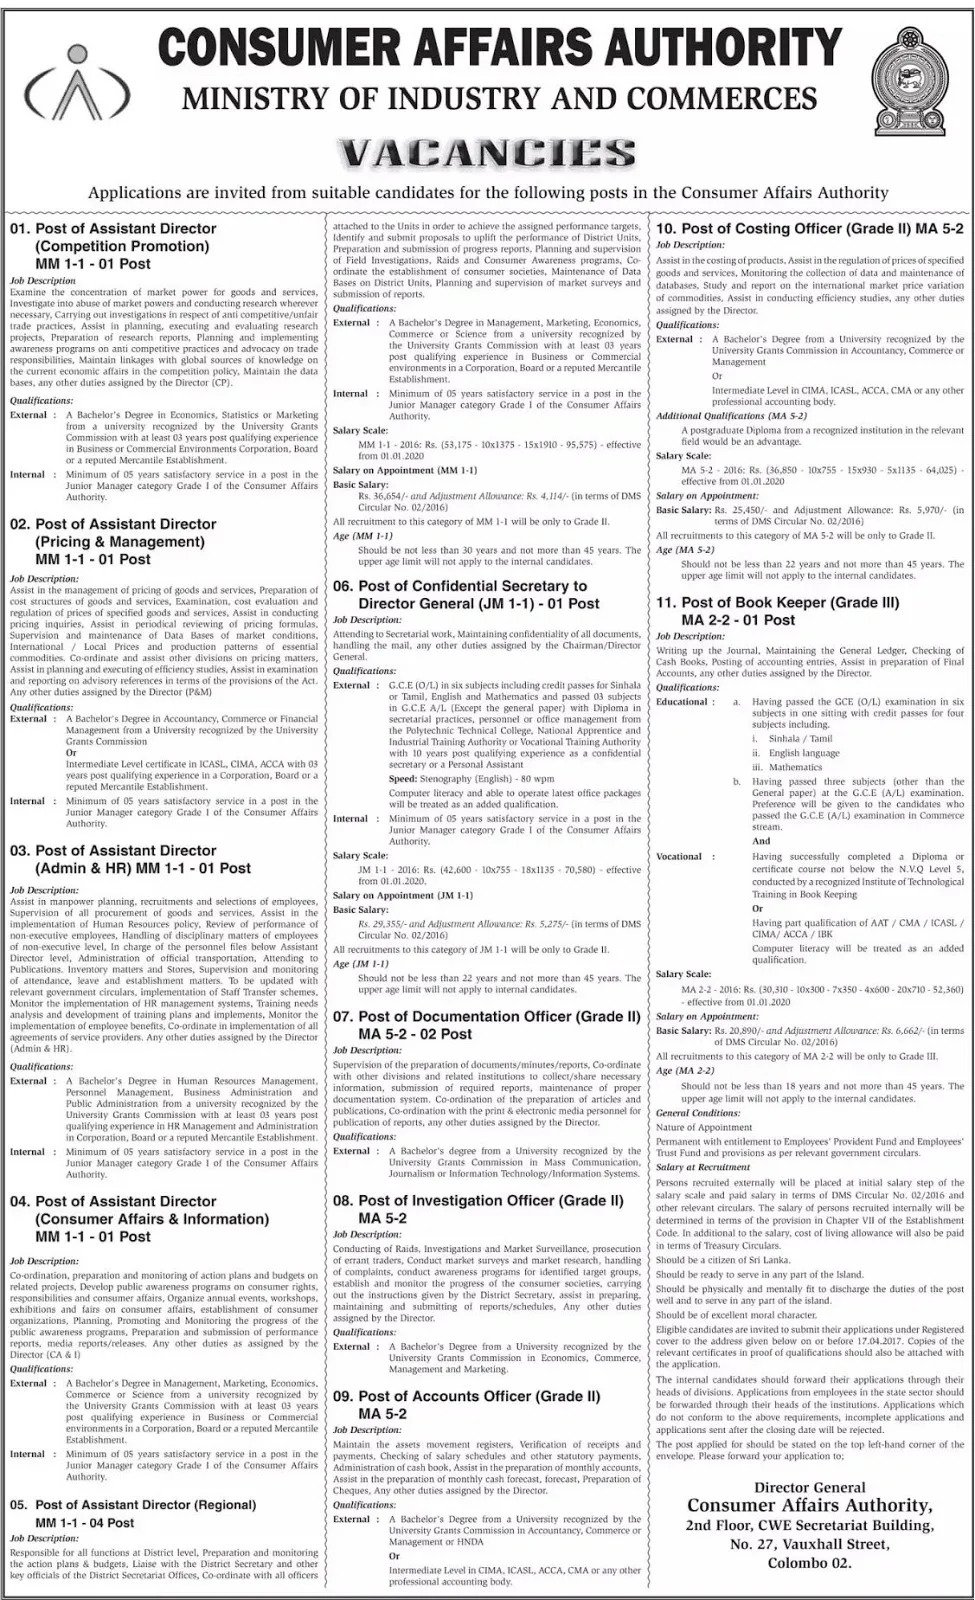 Costing Officer / Book Keeper Vacancies in Consumer Affairs Authority